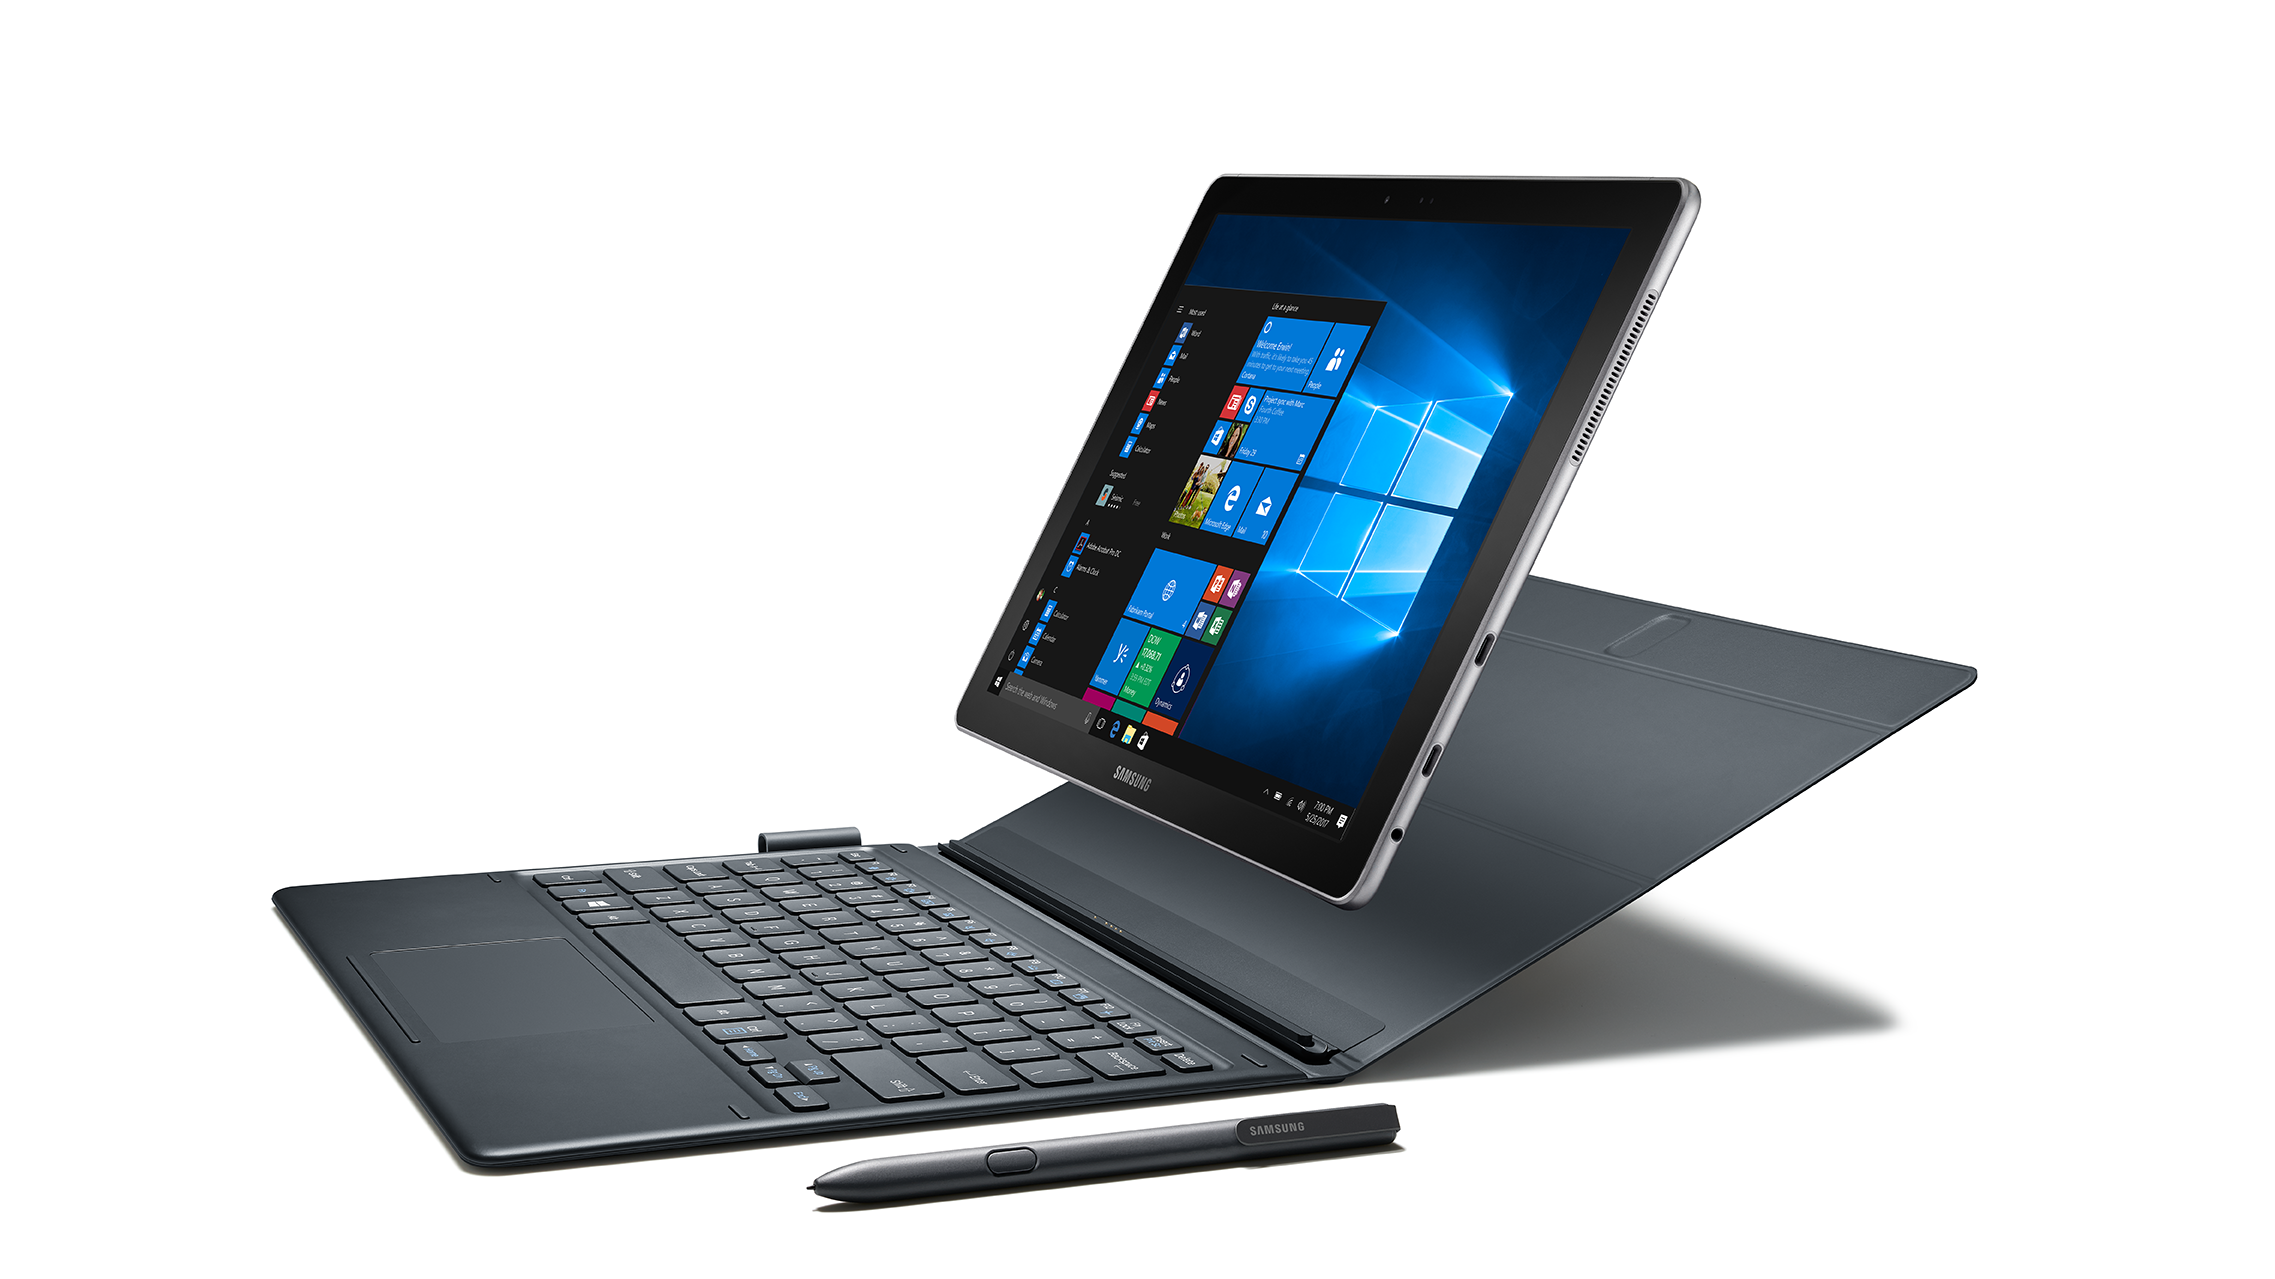 Samsung Delivers Stylish and Powerful Enterprise 2-in-1 Solution with